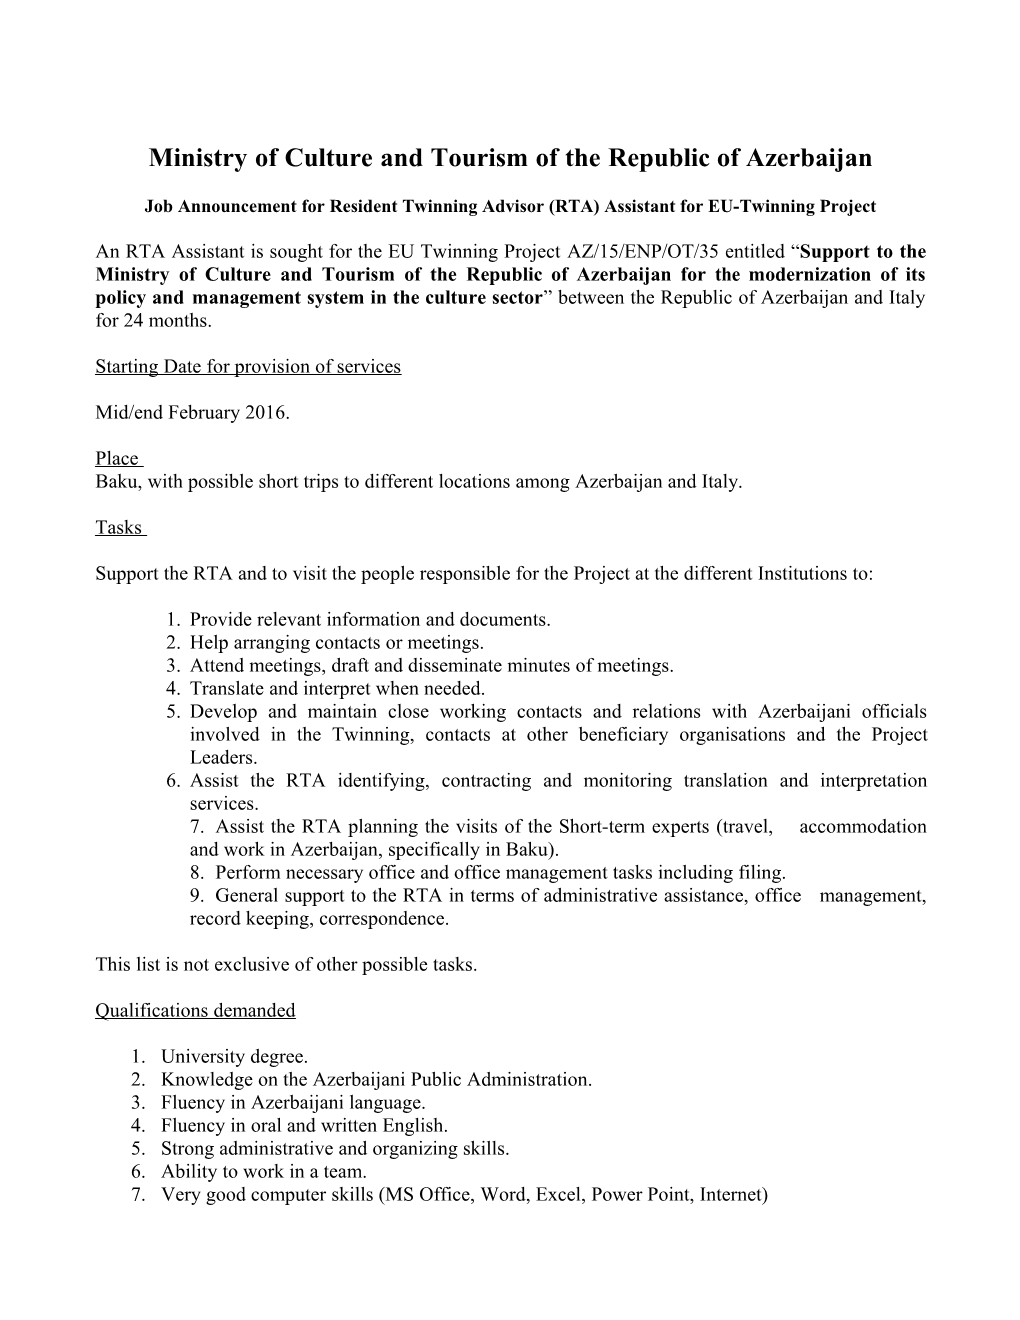 Job Announcement for Resident Twinning Advisor (RTA) Assistant for EU-Twinning Project